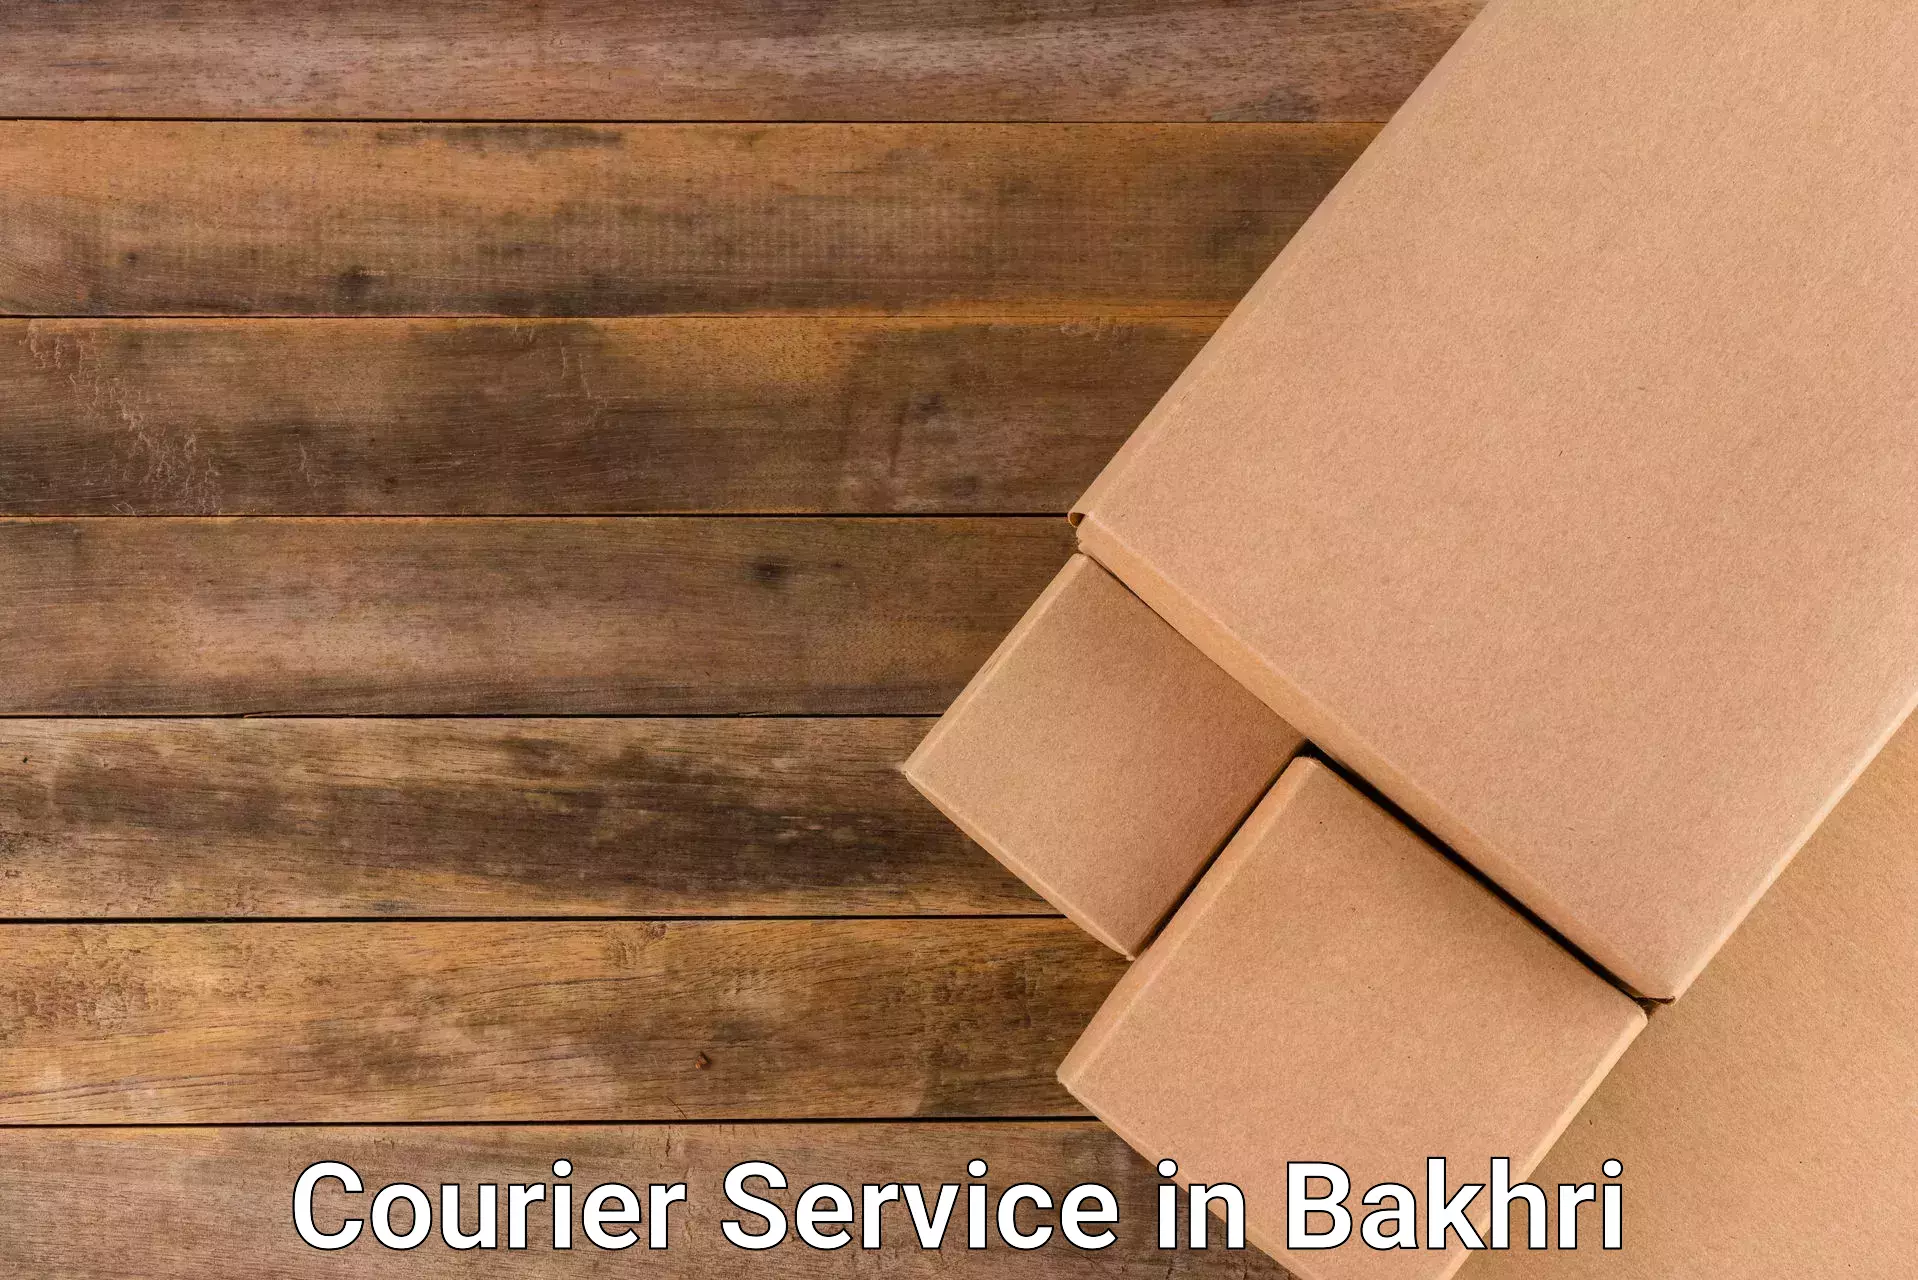 Specialized courier services in Bakhri